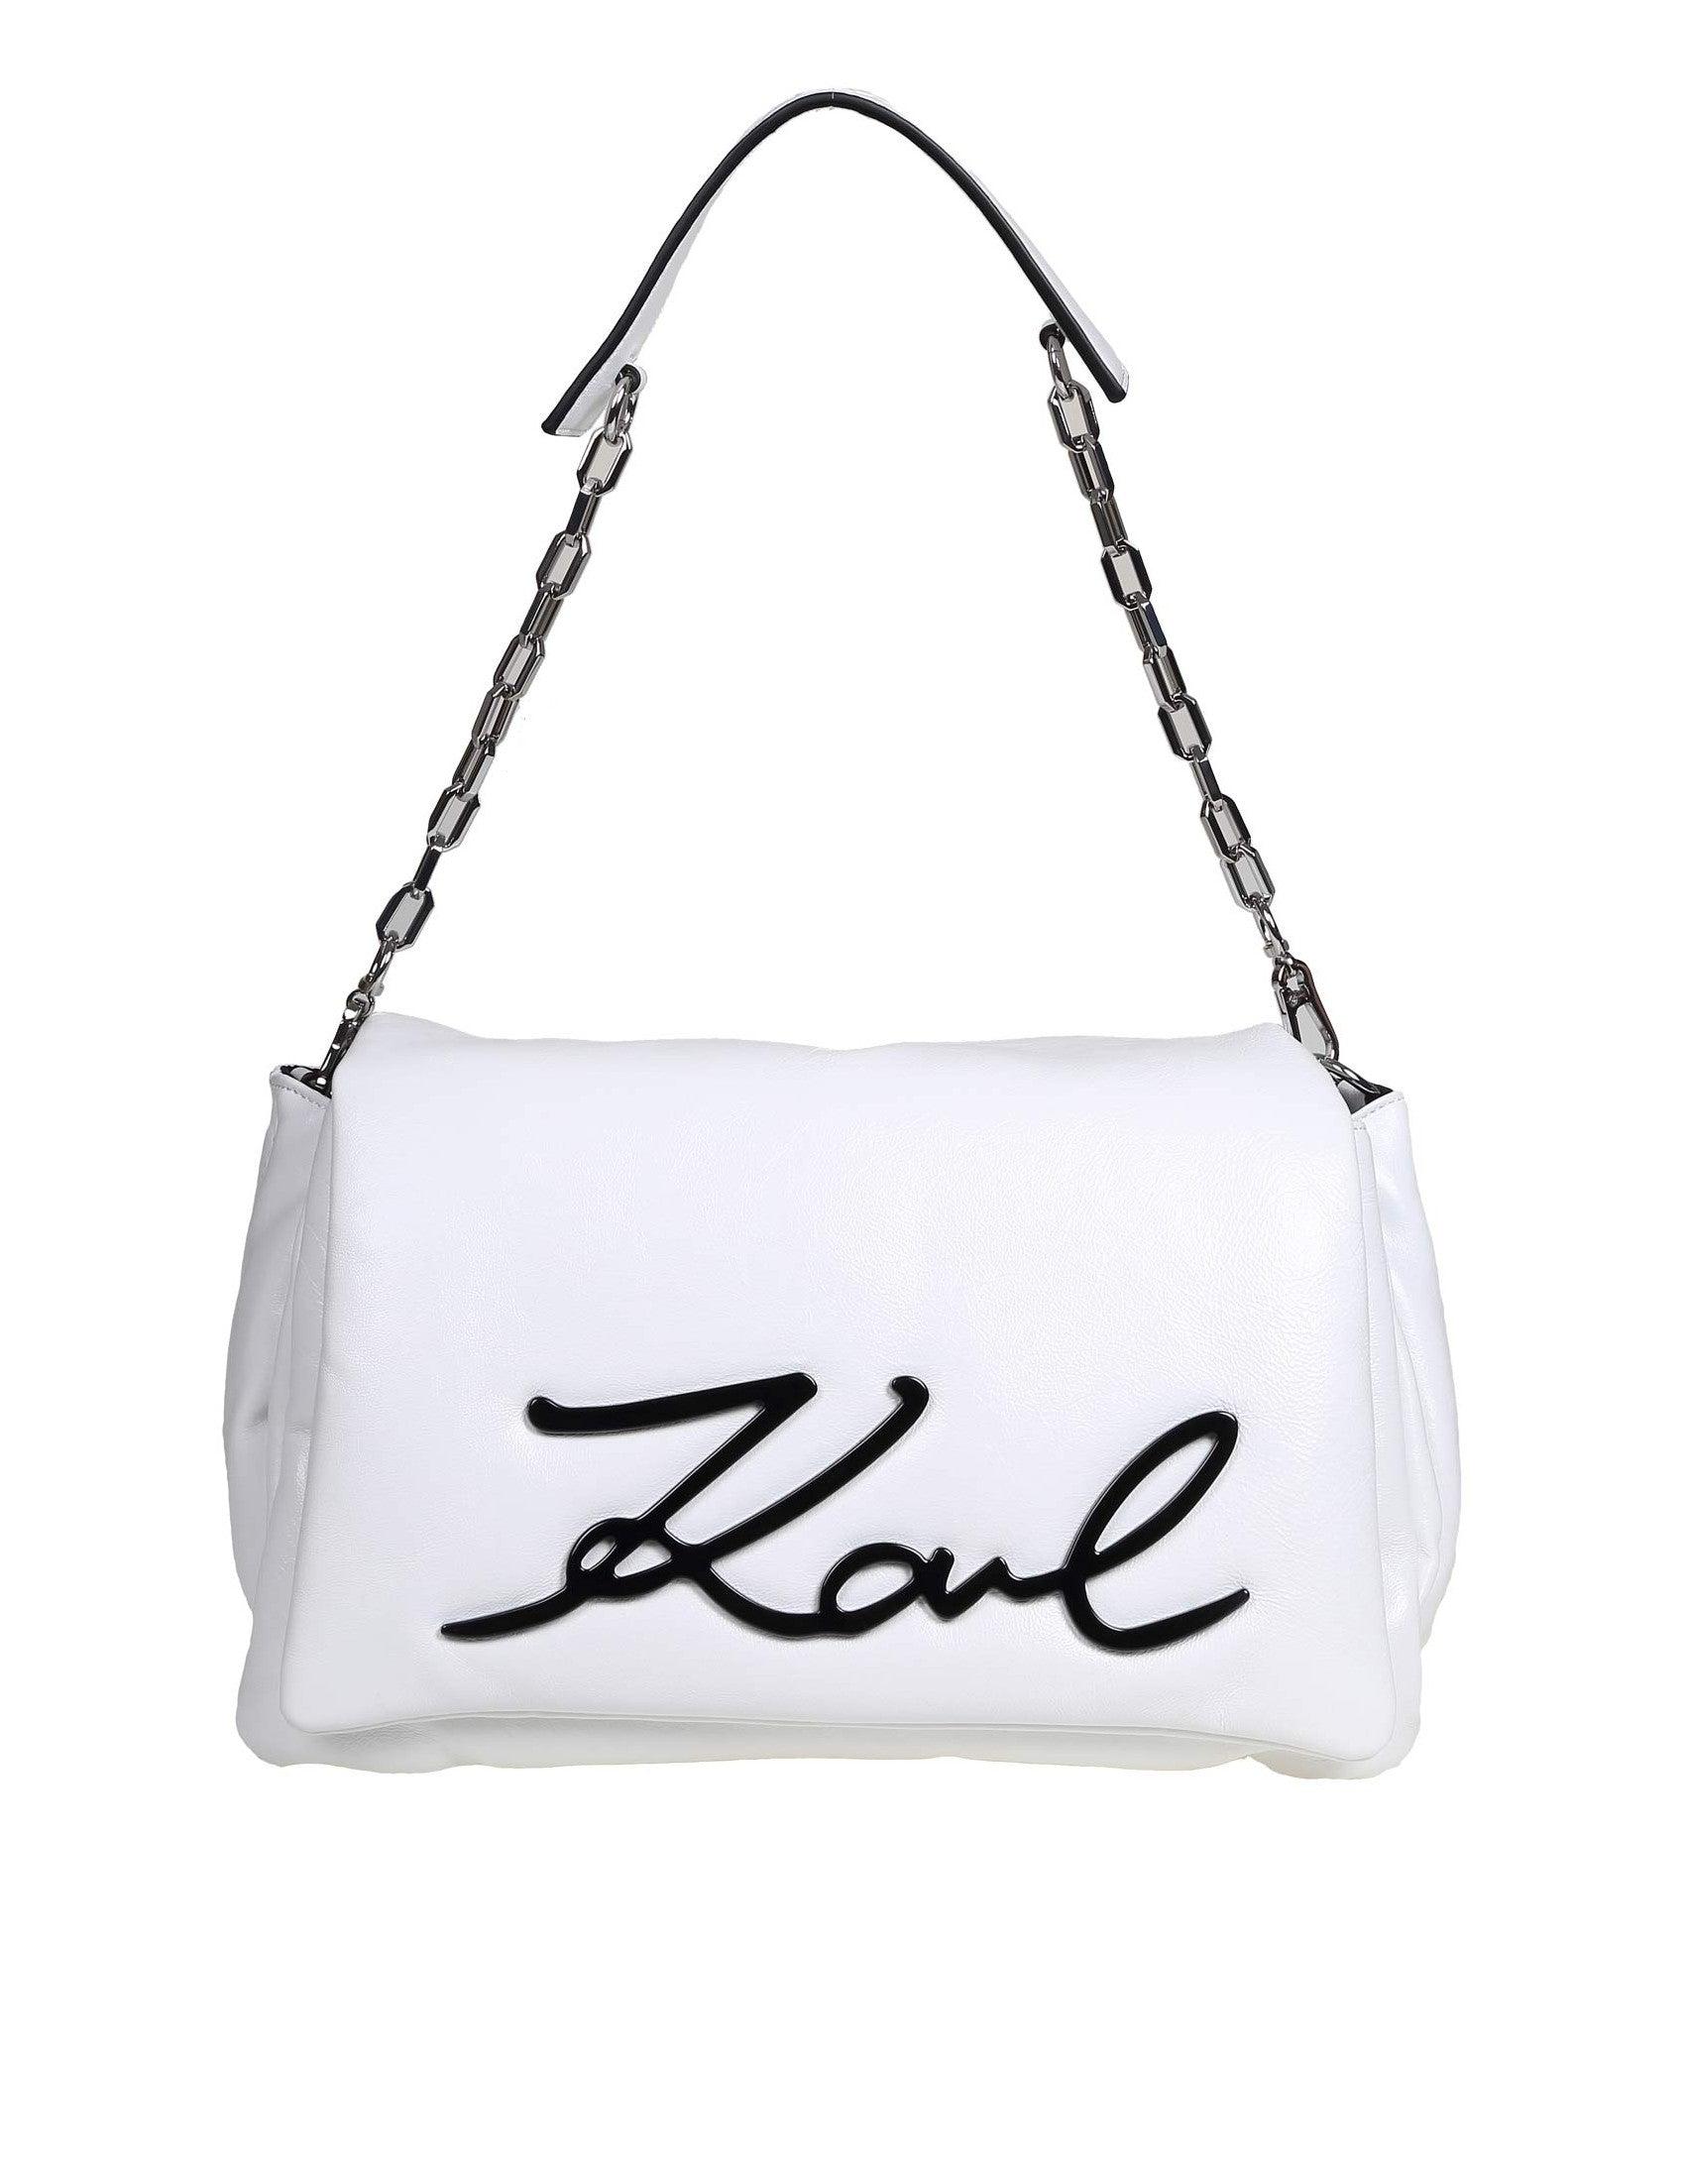 Karl Lagerfeld K / Signature Shoulder Bag In Soft Leather in White | Lyst